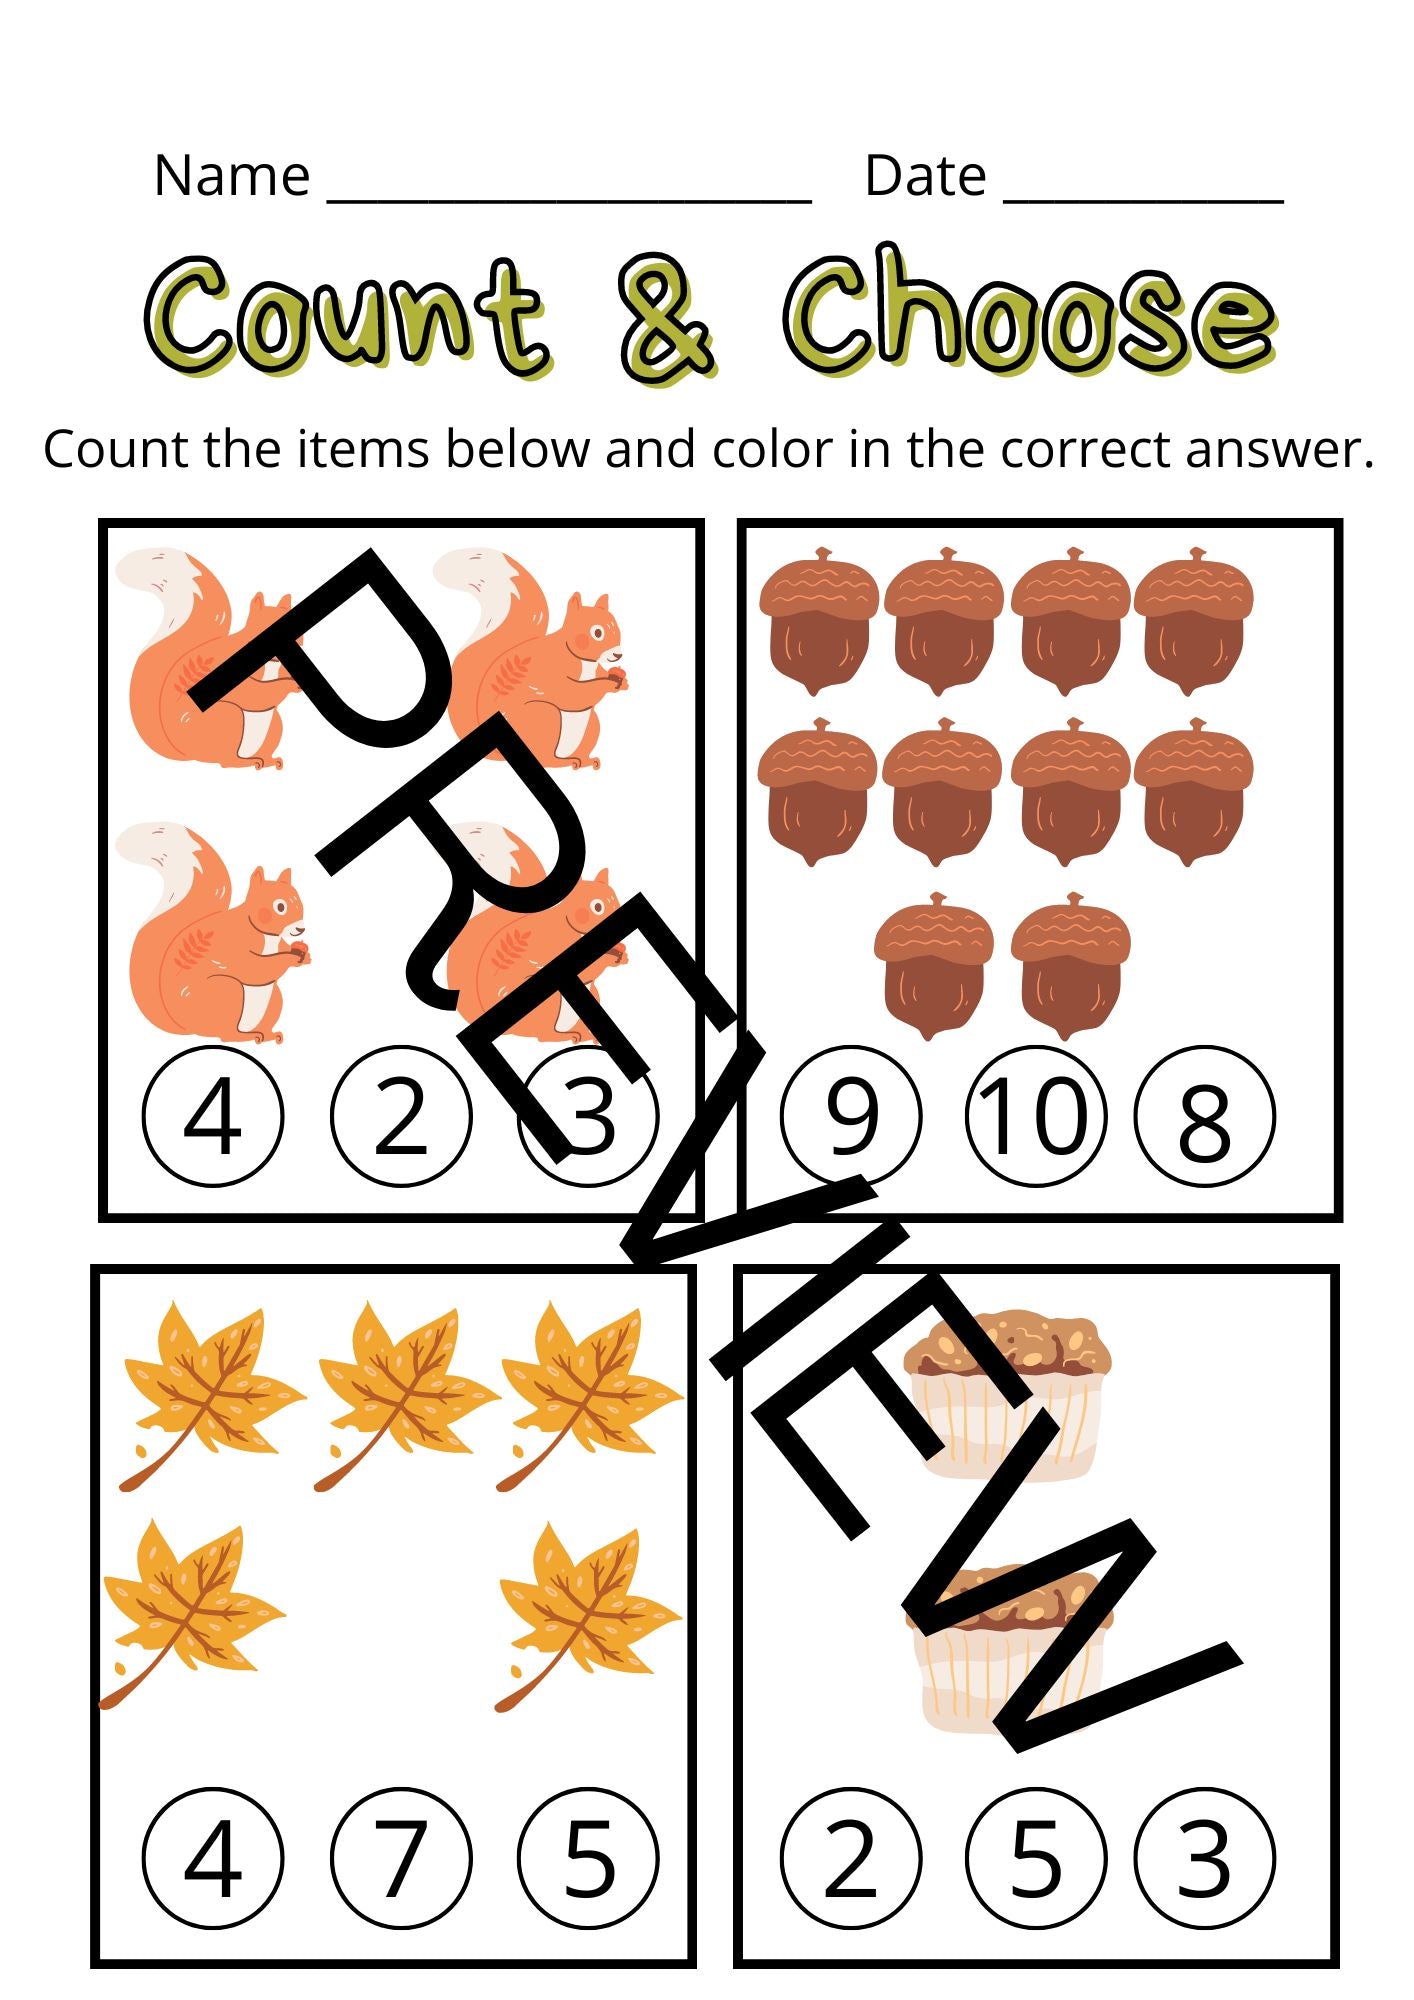 Count & Choose - Fall Edition